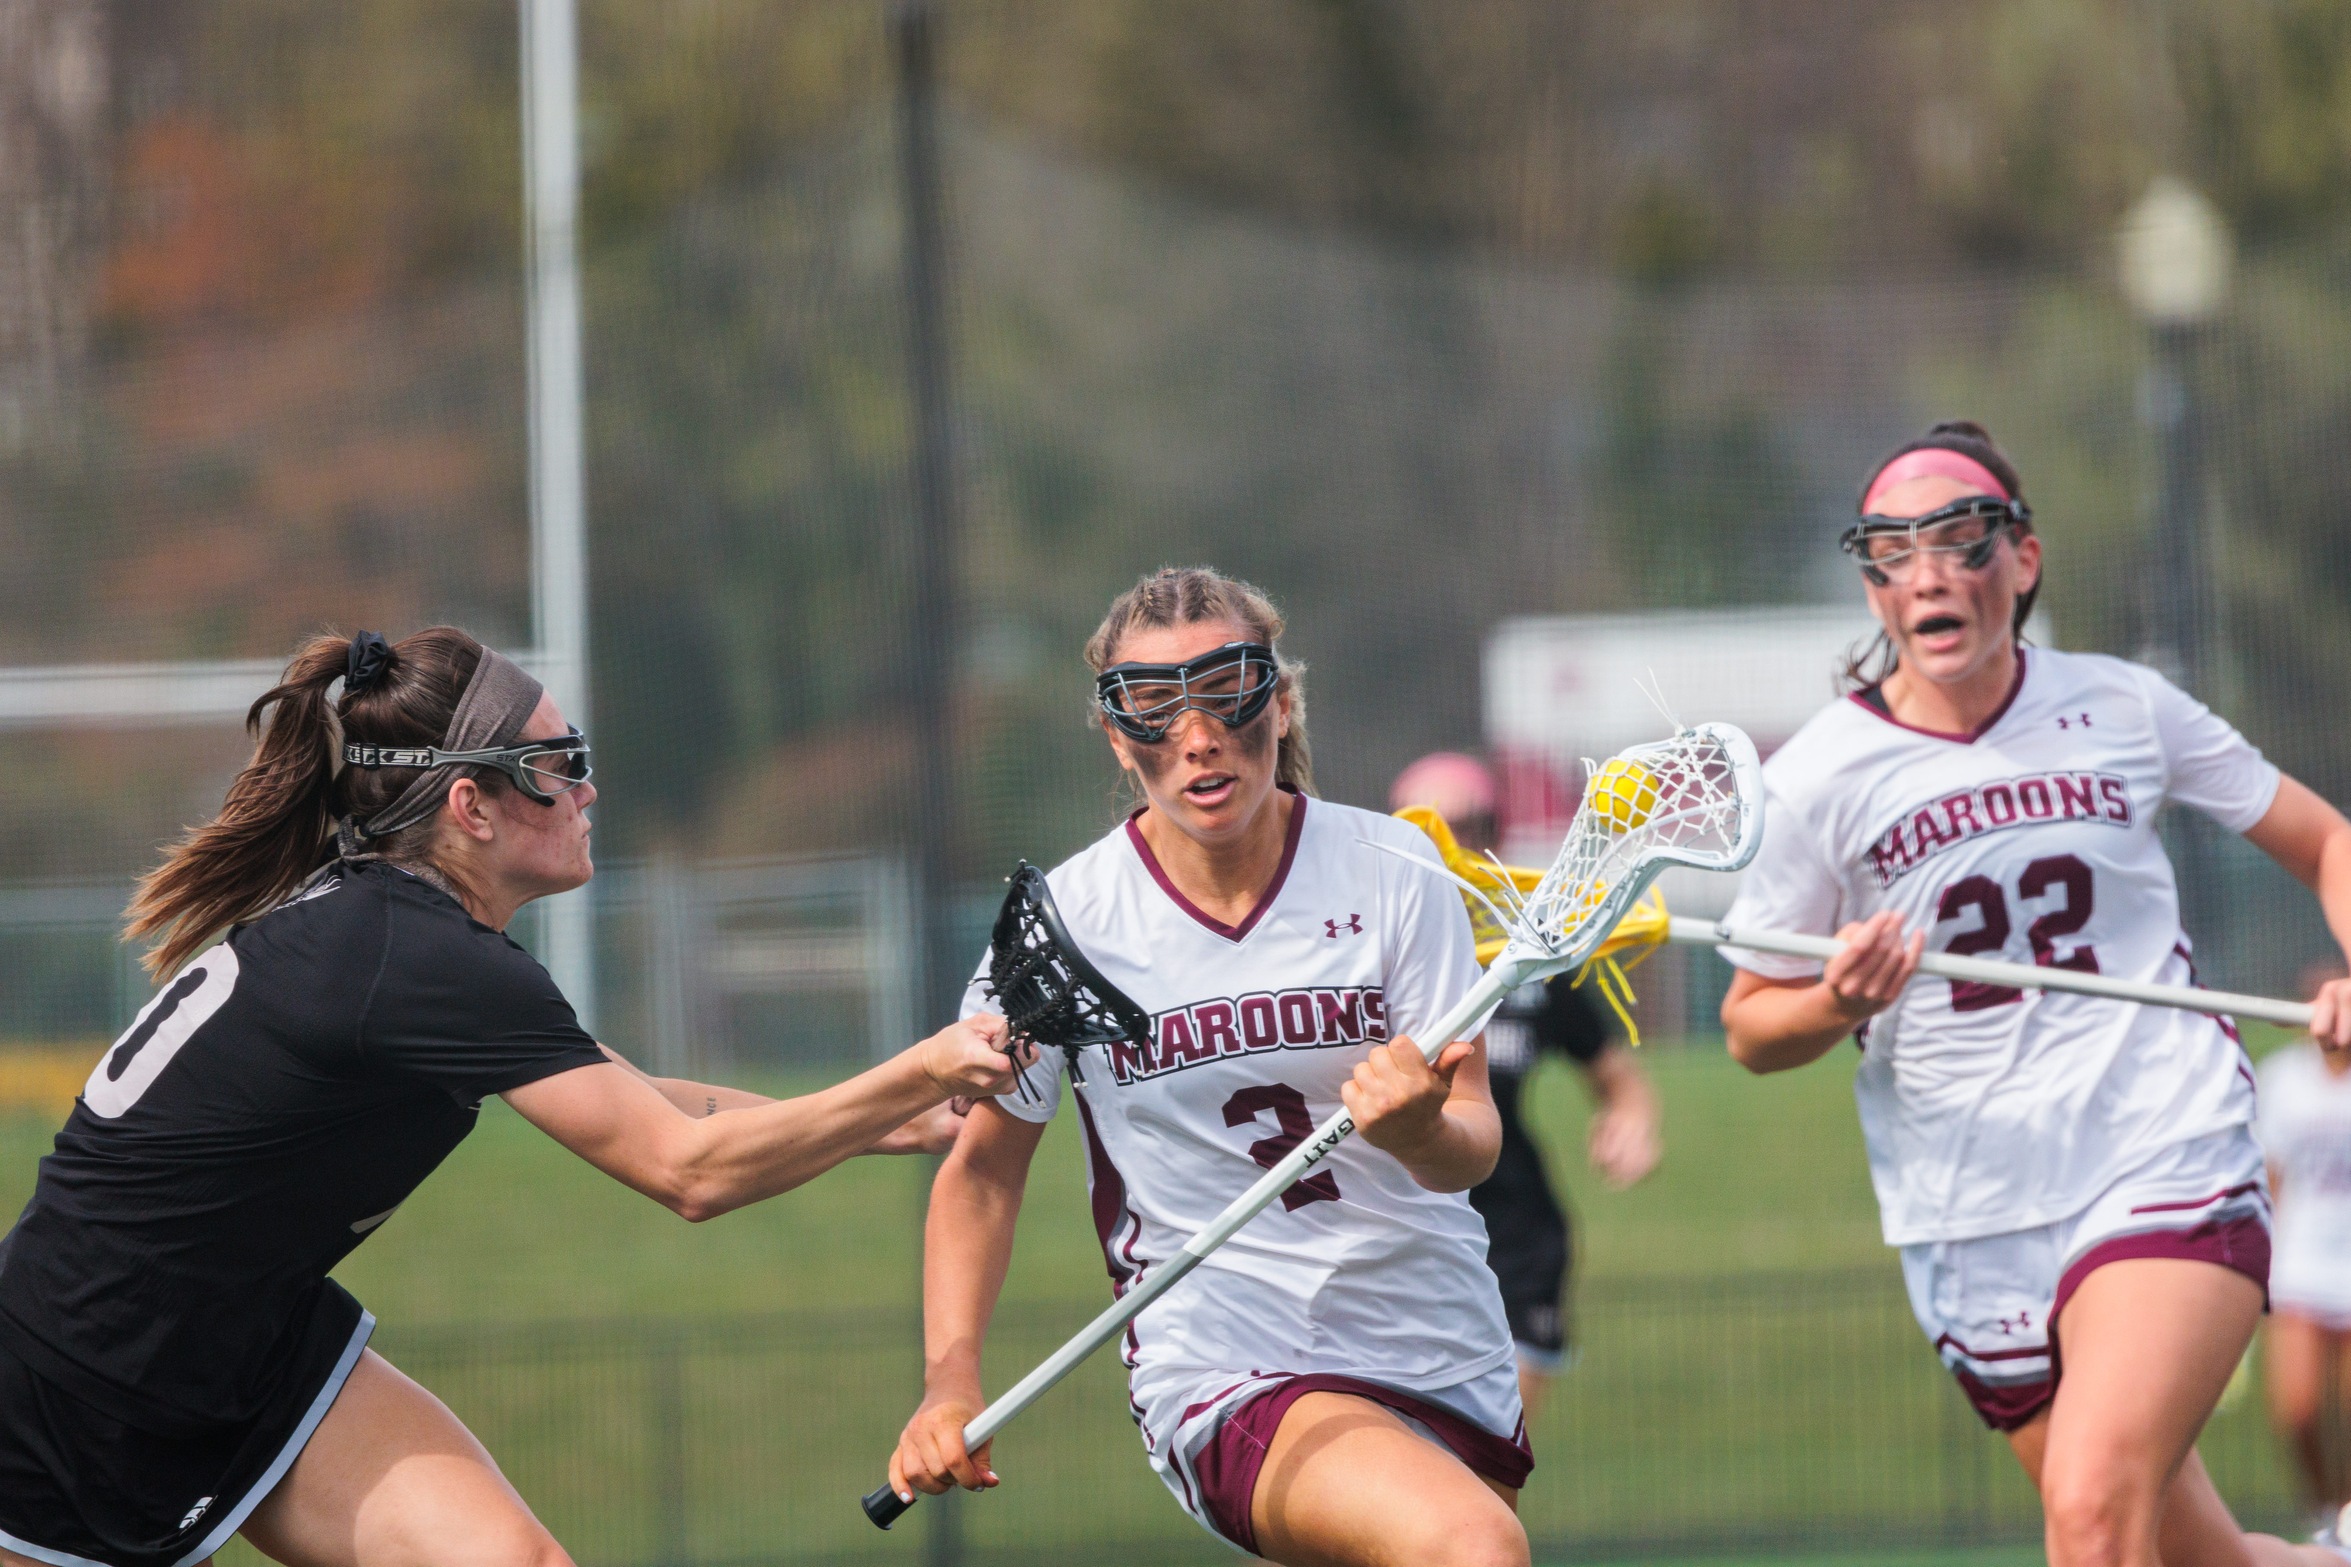 action photo of WLAX Sydney Harrison (2) with the ball and Riley Chase (22) following